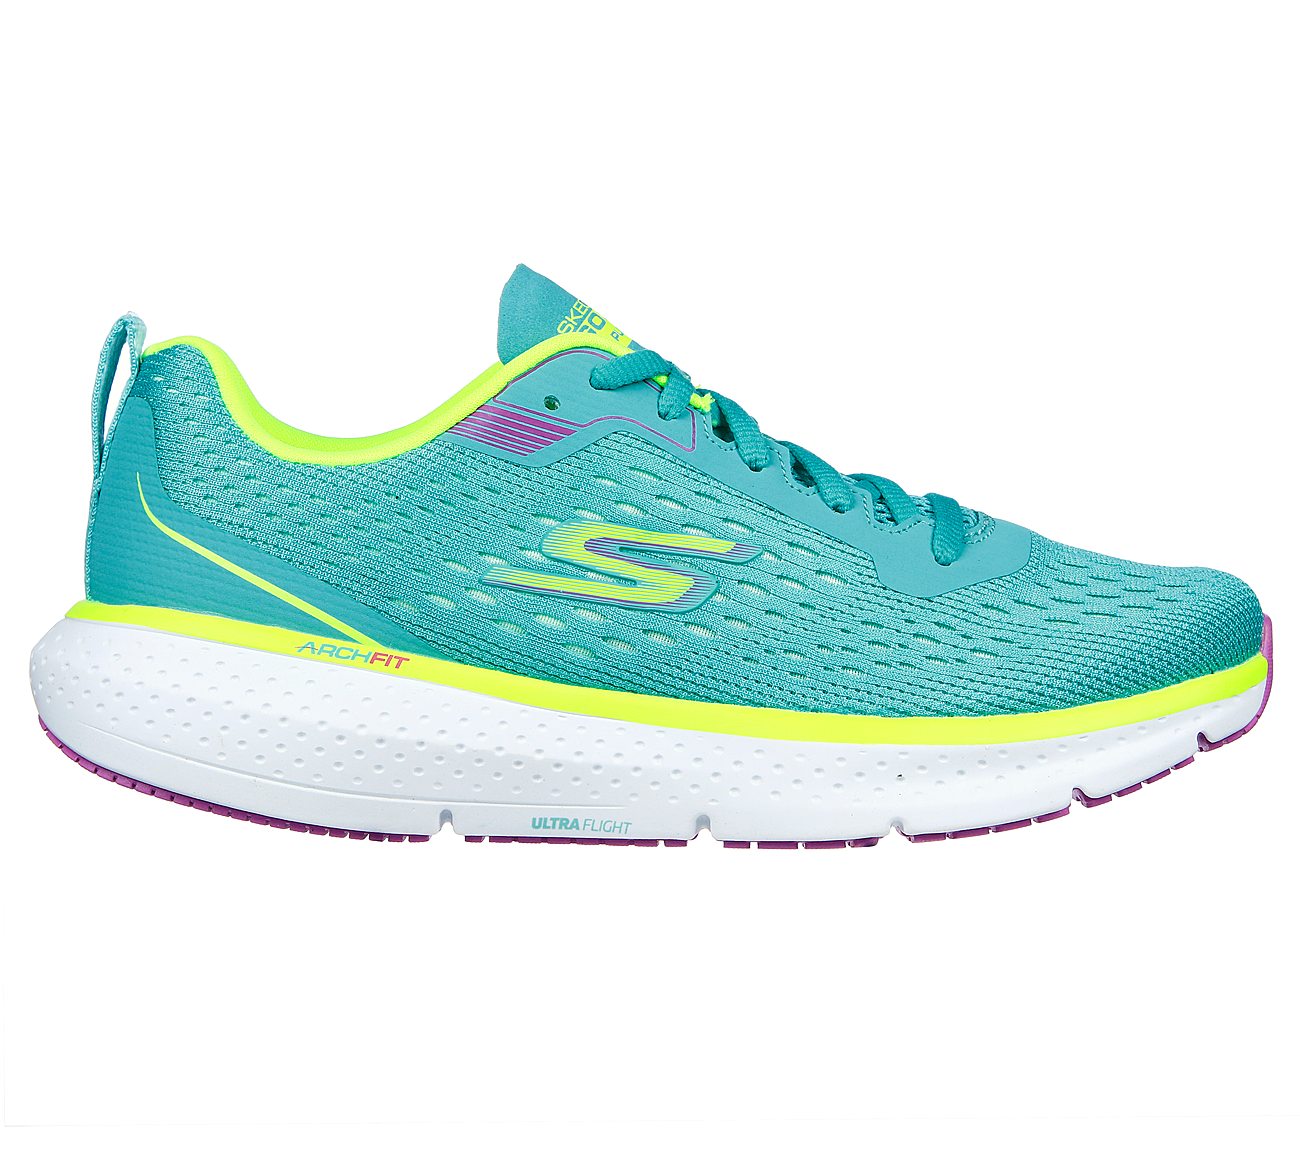 GO RUN PURE 3, TEAL Footwear Lateral View